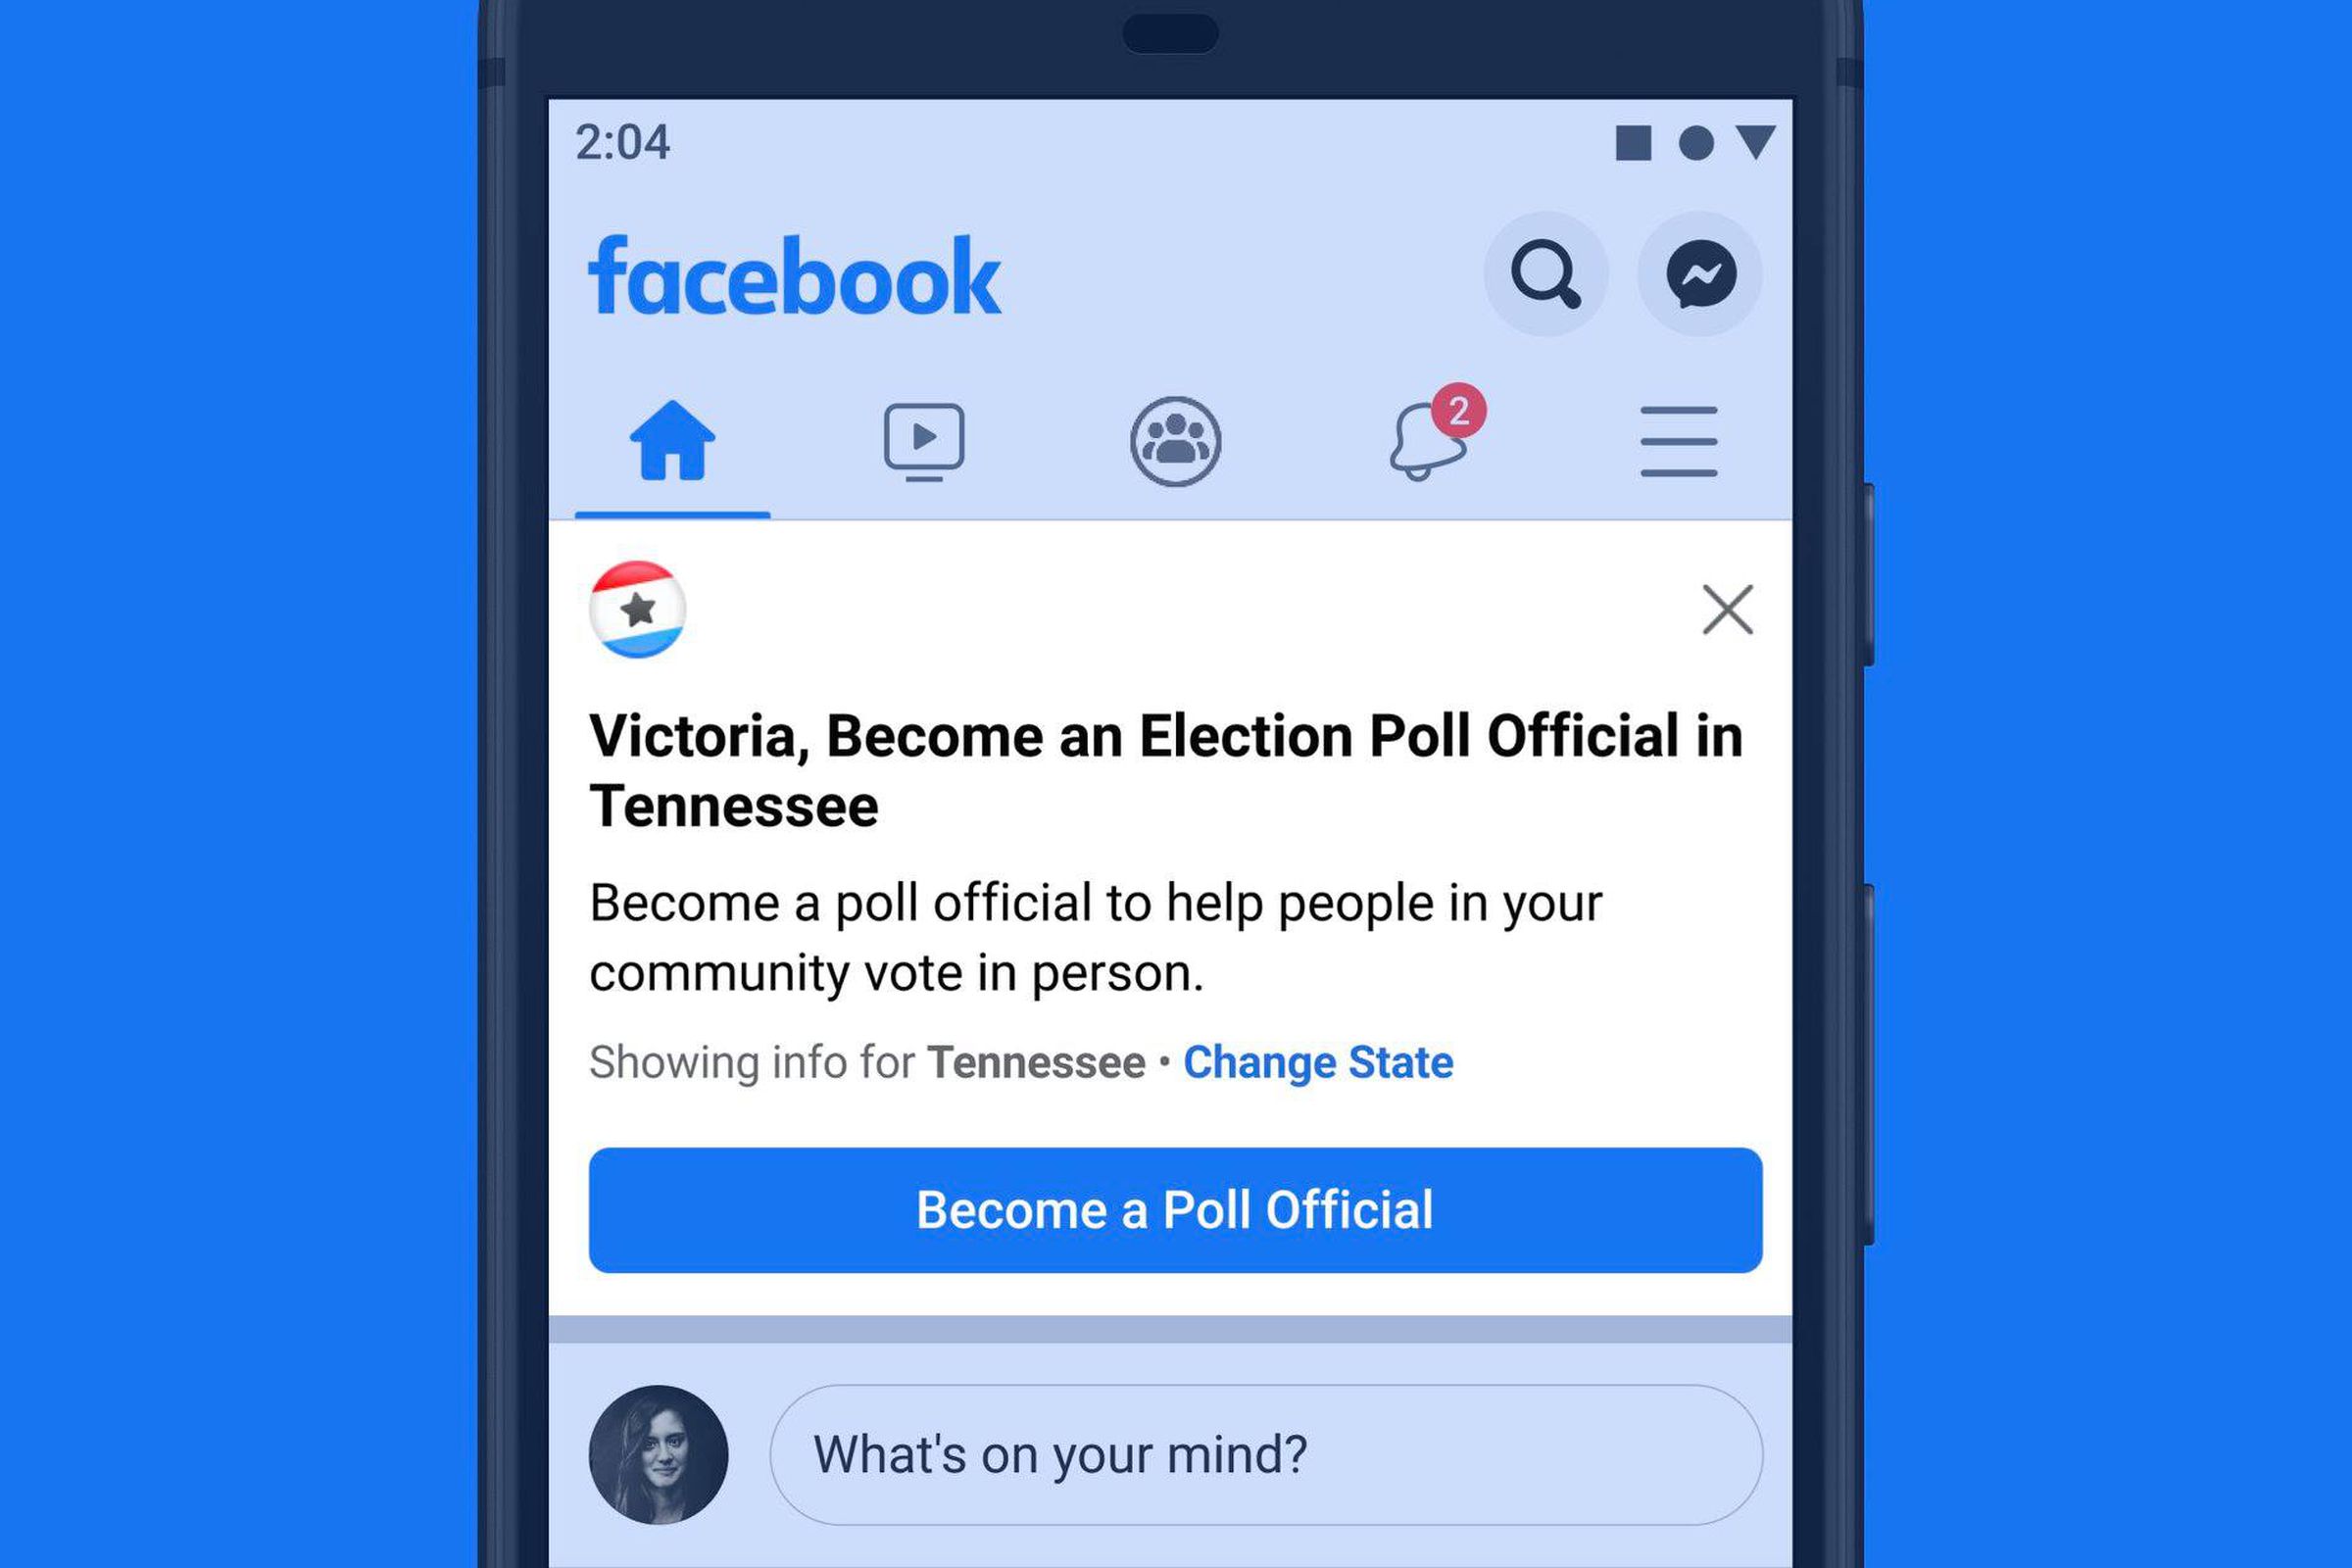 Facebook launching an effort to recruit poll workers